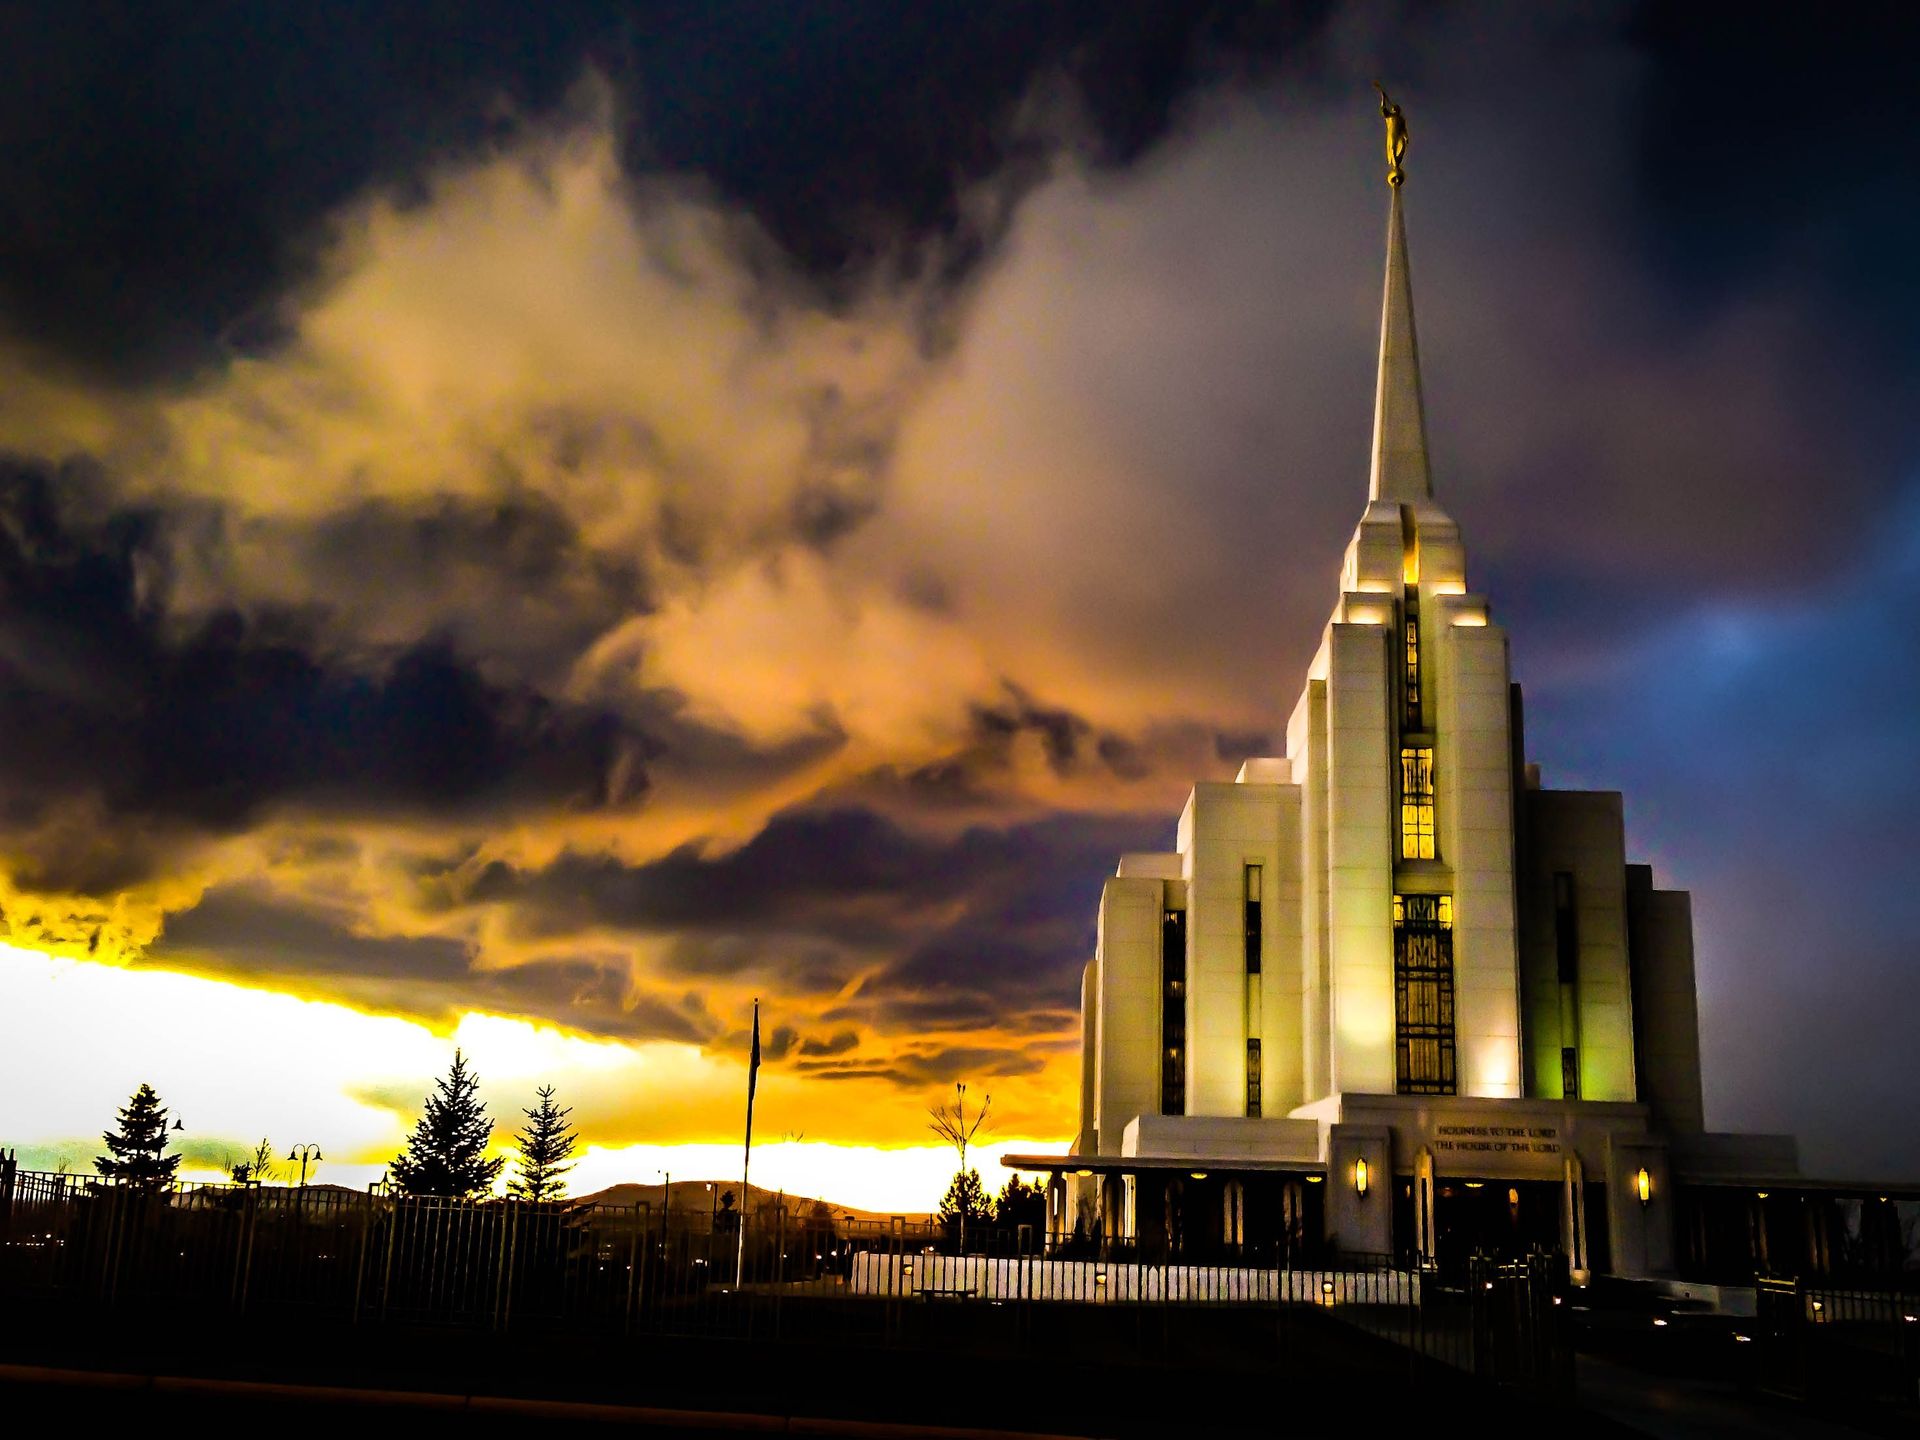 The Rexburg Idaho Temple at sunset, including the entrance and scenery.